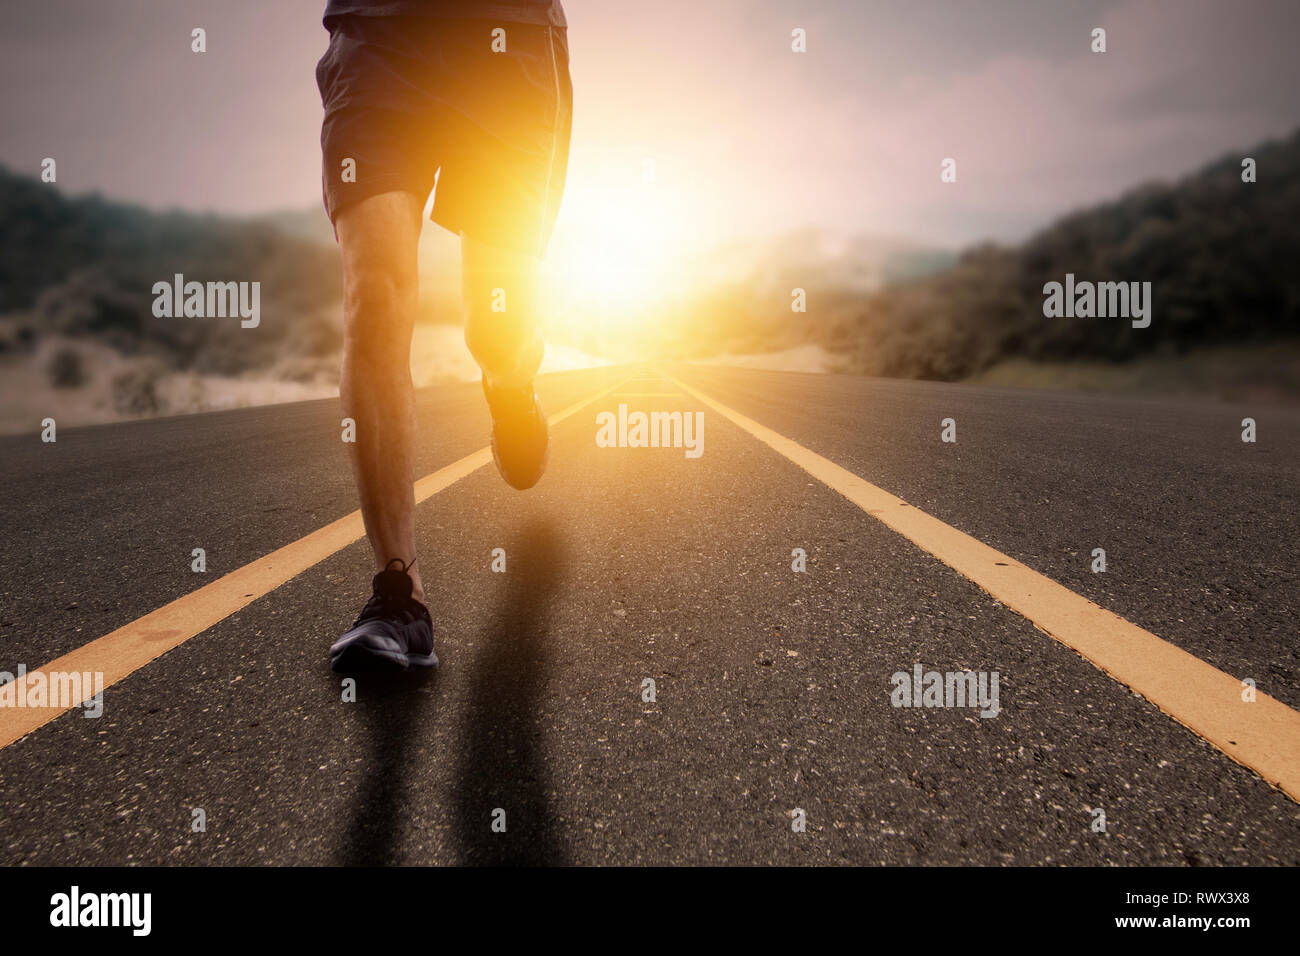 Goal and Strive concept, Runner run on road with sun rising. Stock Photo